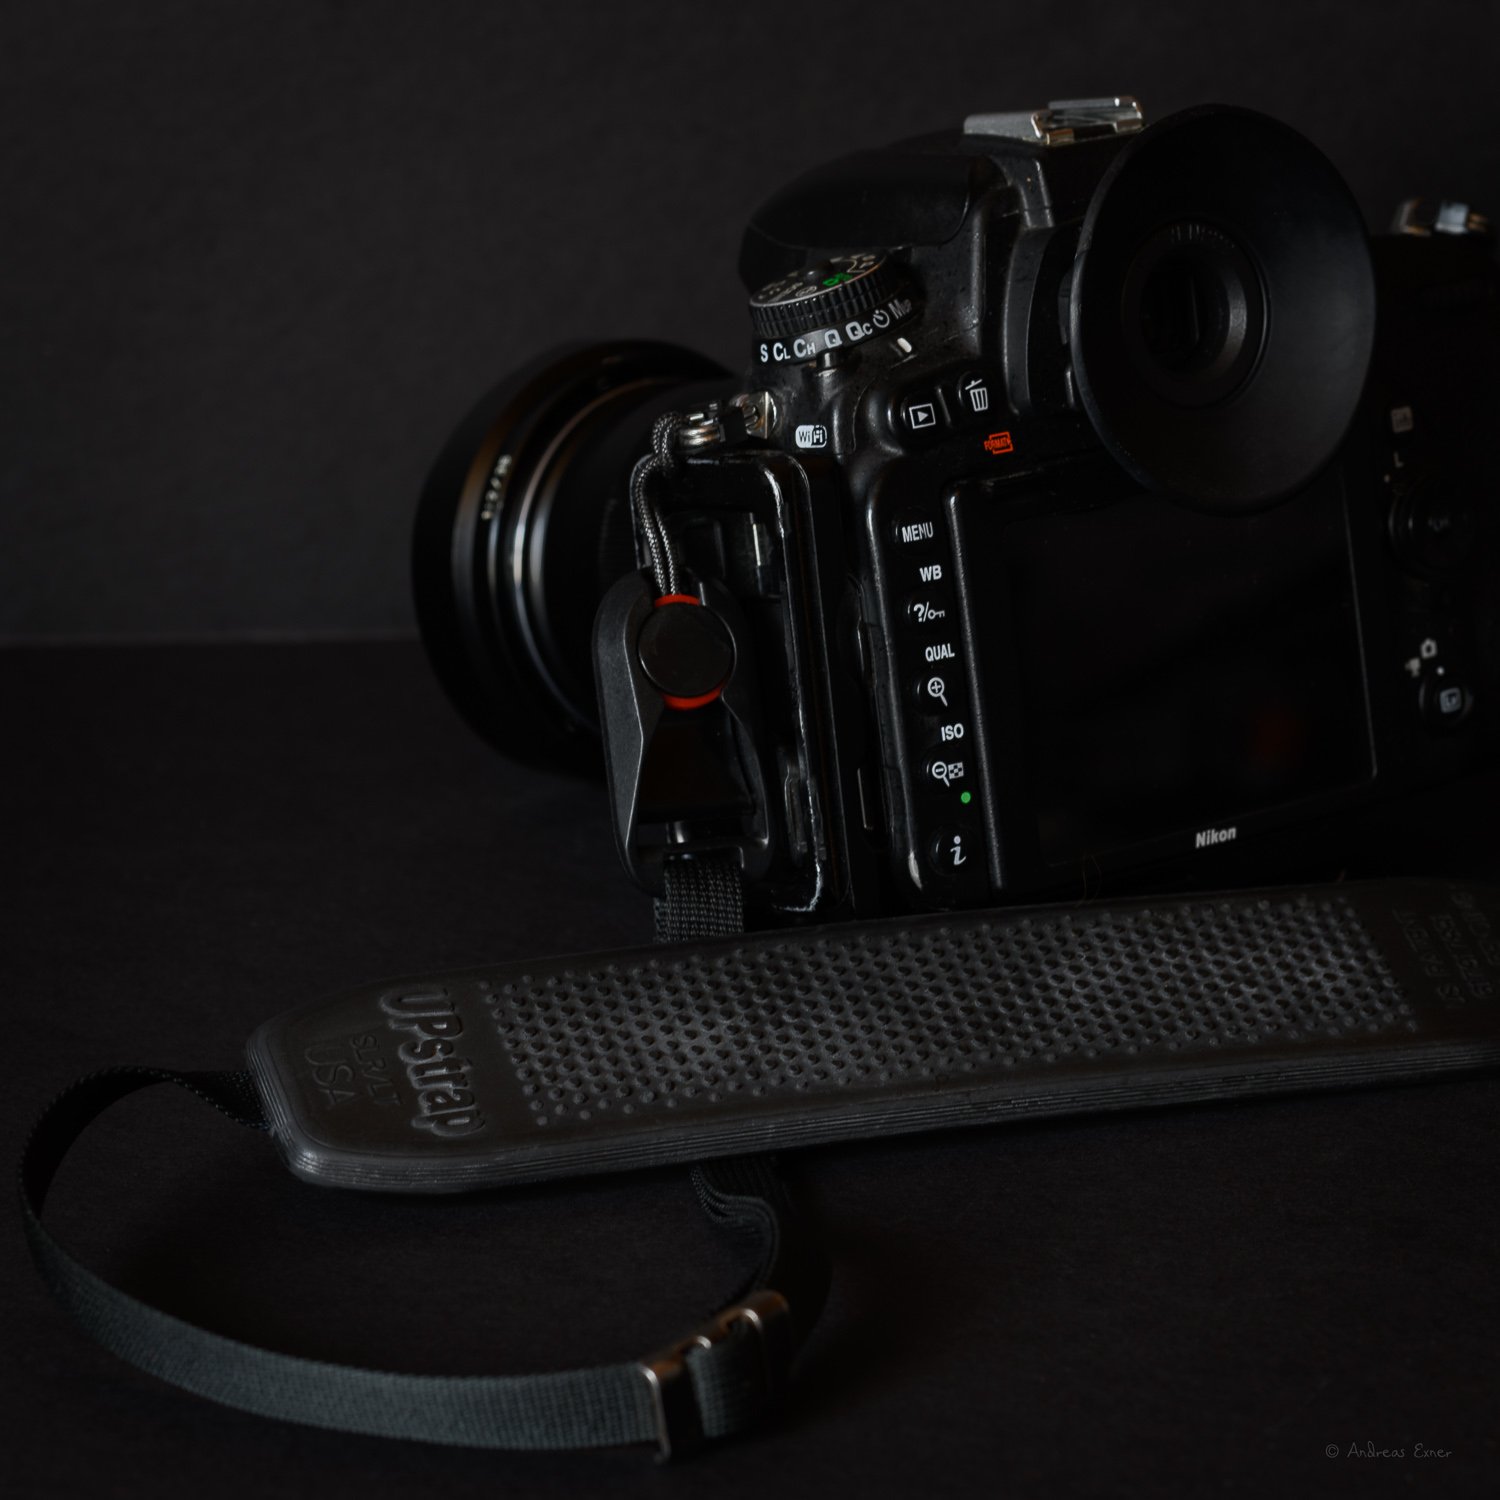  UPstrap Sure-grip shoulder strap  Double-sided non-slip strap that stays on the shoulder even with a heavier camera / lens combo.  ★ ★ ★ ★  Peak Design AL-4 Anchor Links  I have a set on each camera. The anchor links allow to detach the shoulder str